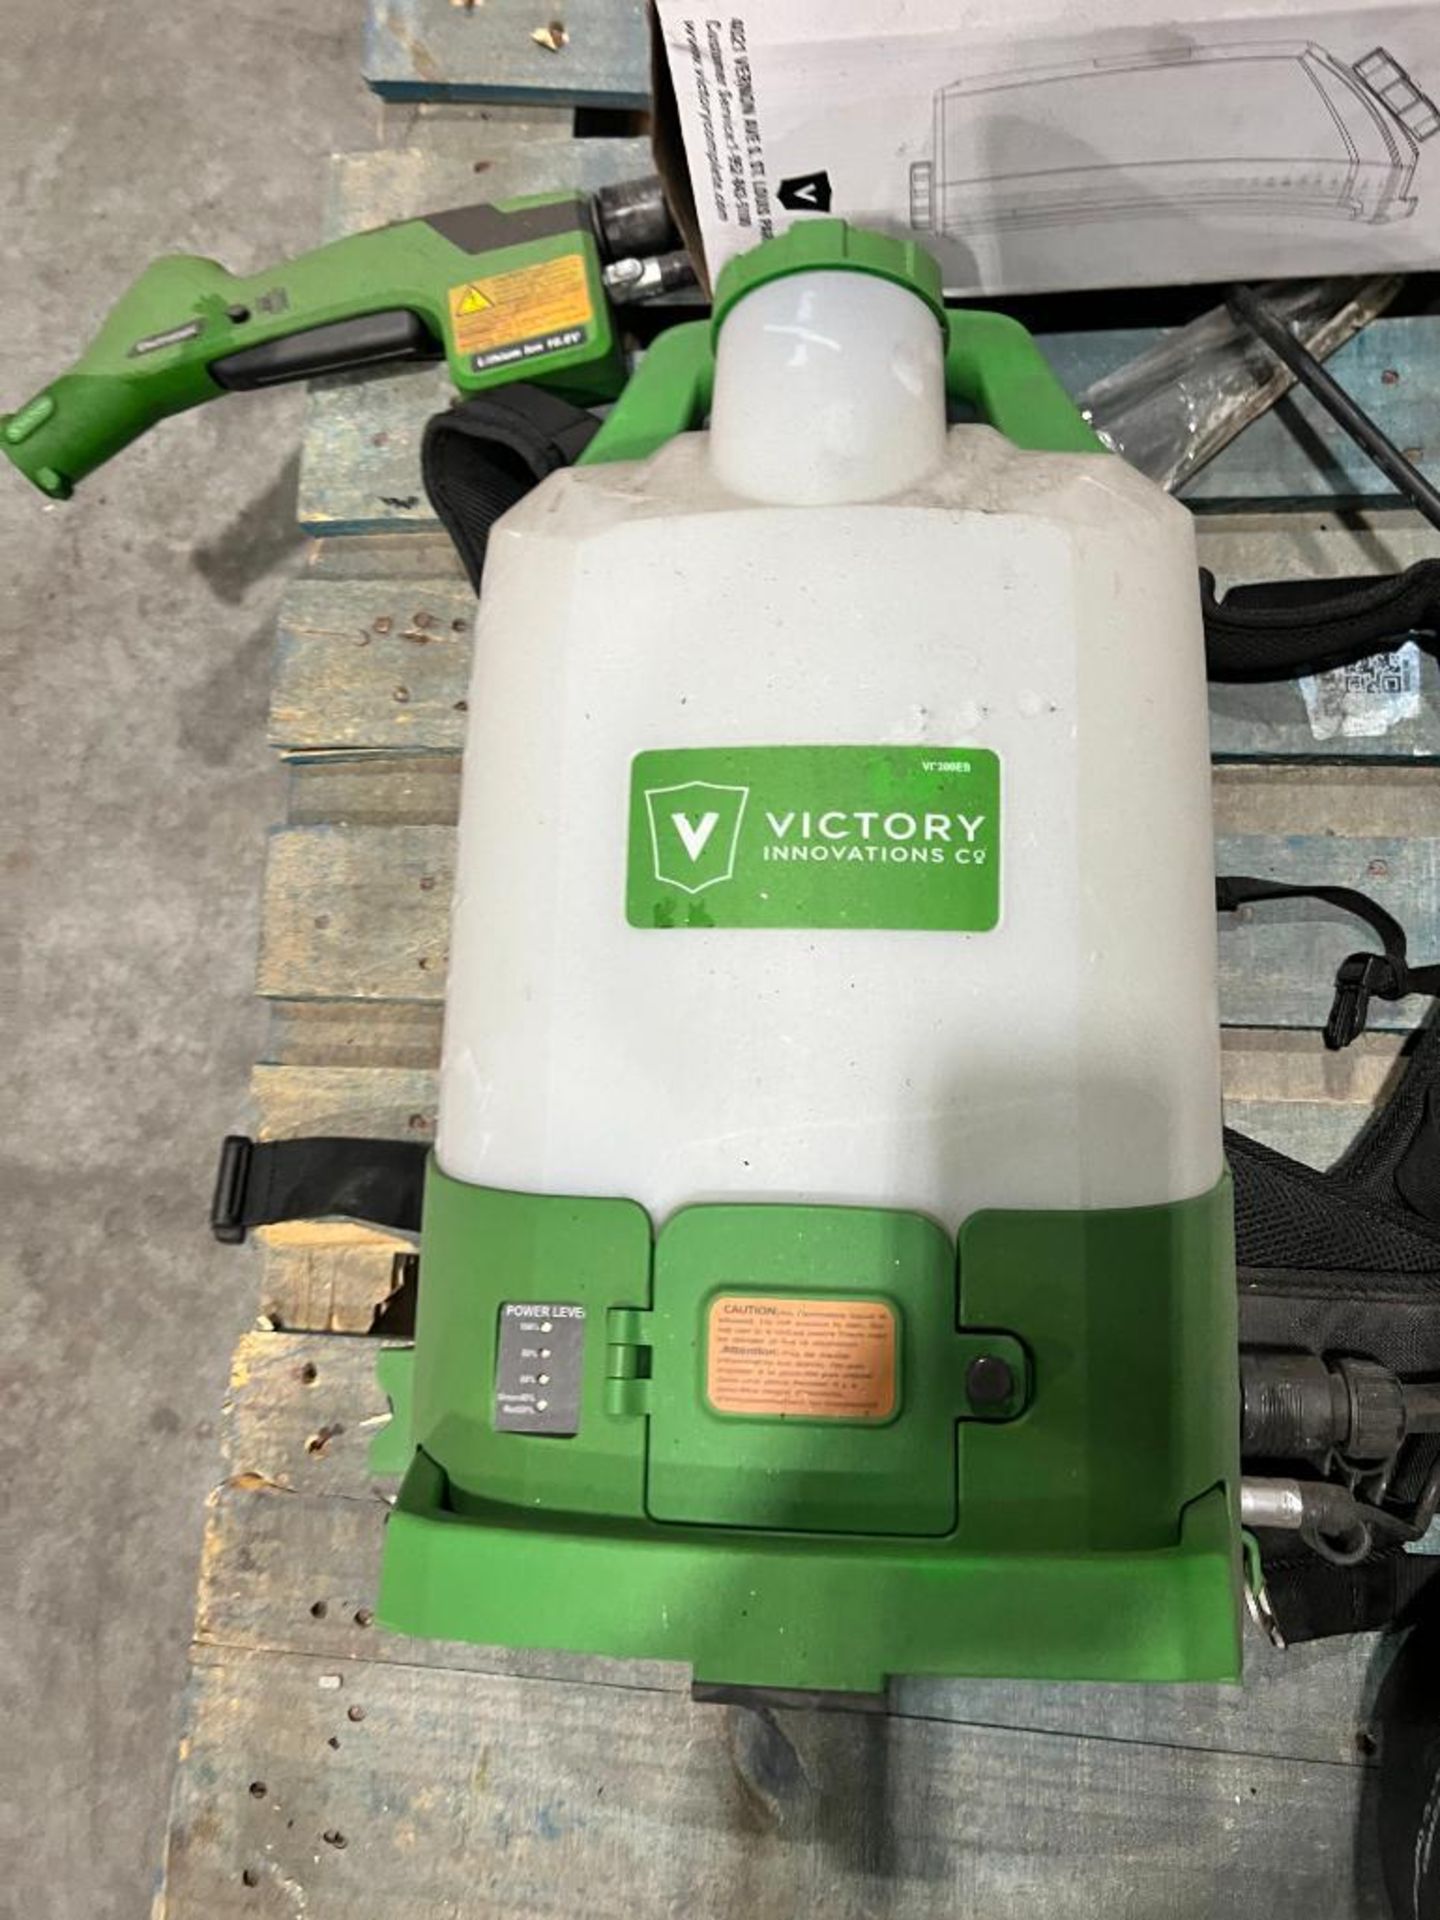 Victory Backpack Tank & Sprayer, Chapin, Sprayers, Vital Oxide, Disinfectant - Image 3 of 5